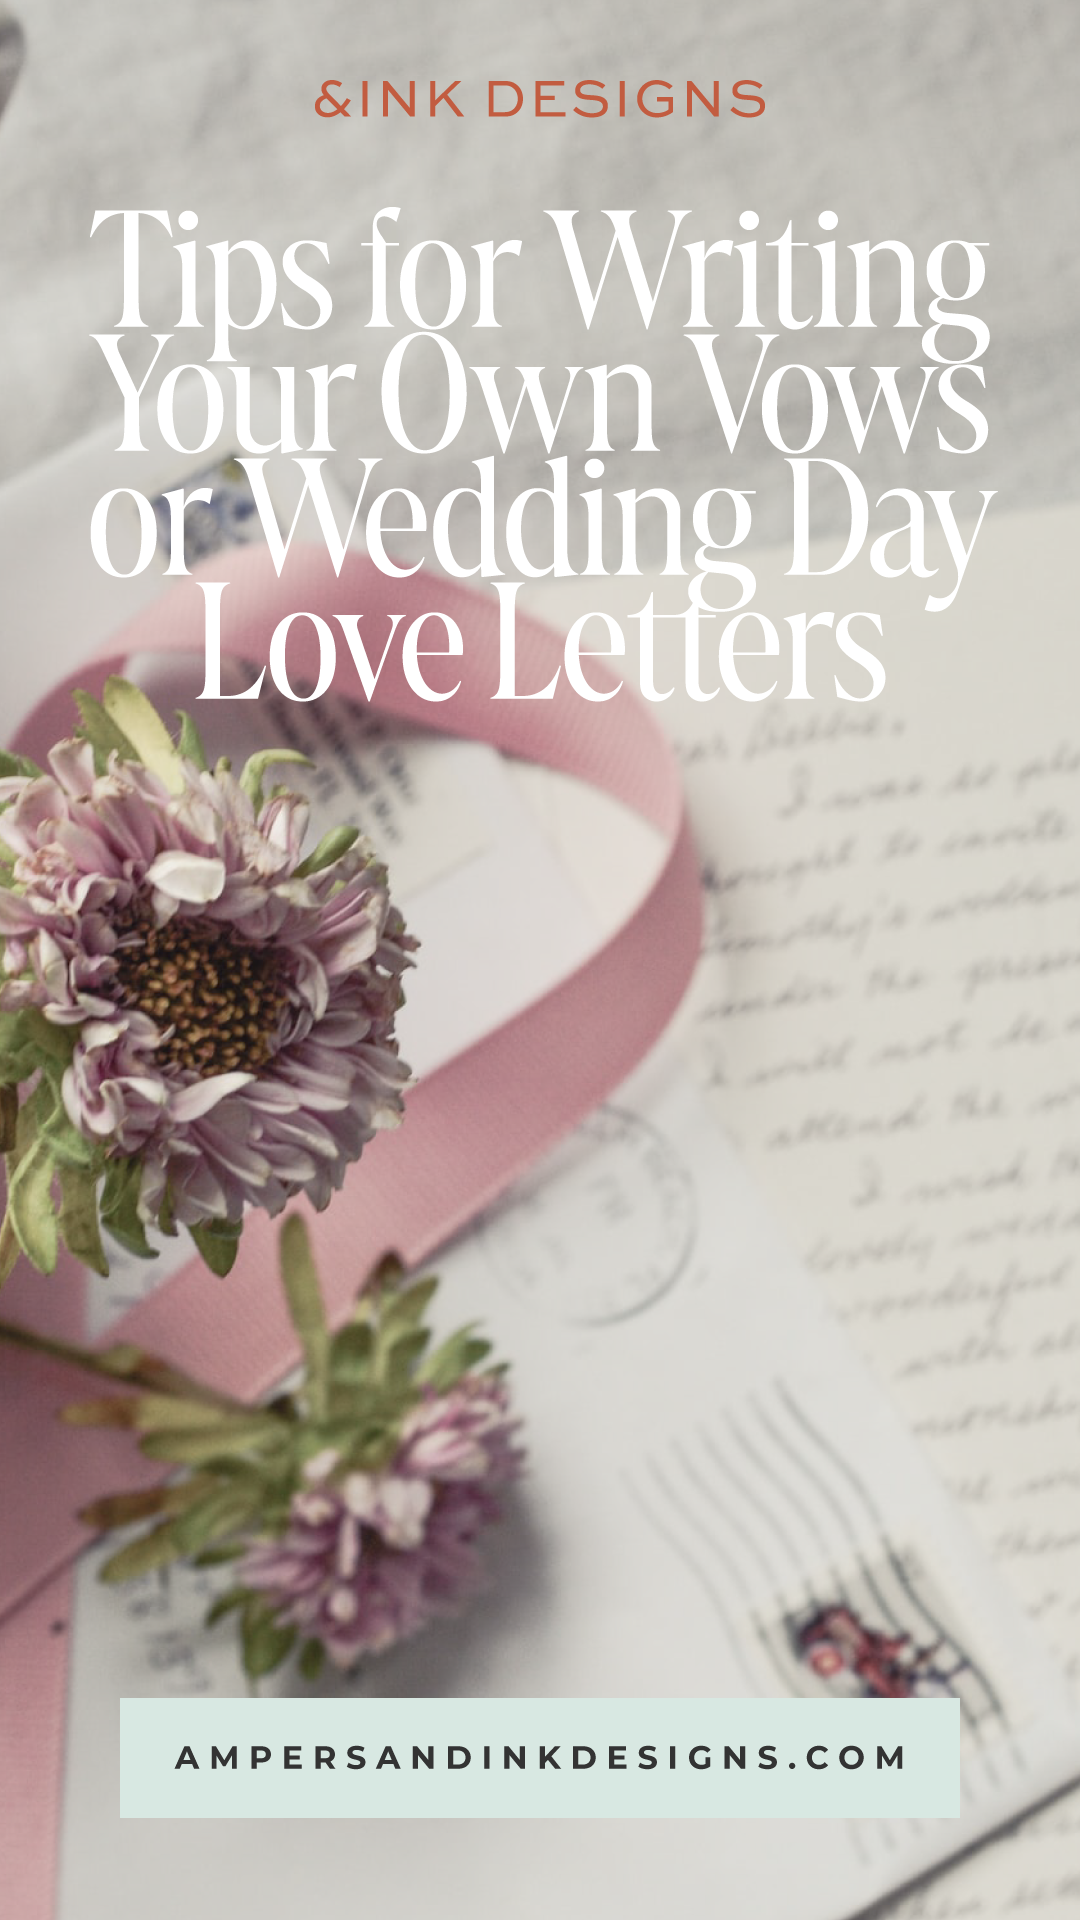 Tips for writing your own vows or wedding day love letters